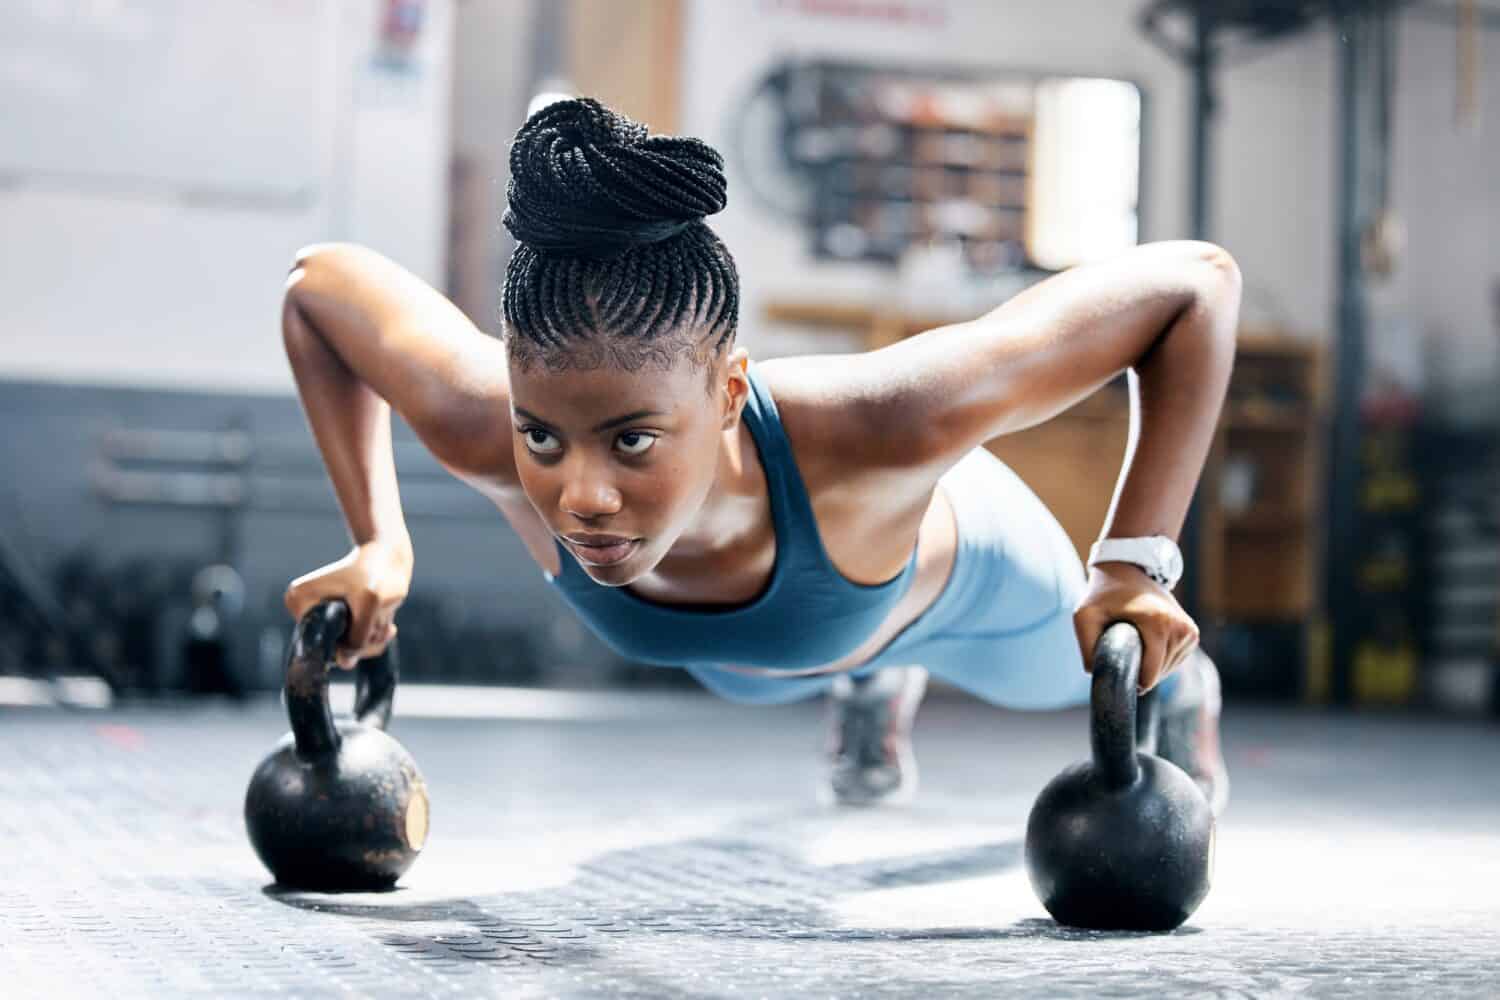 Fitness, push up or black woman with kettlebell for training, body workout or exercise at health club. Motivation, mindset or African girl sports athlete exercising with focus or resilience at gym